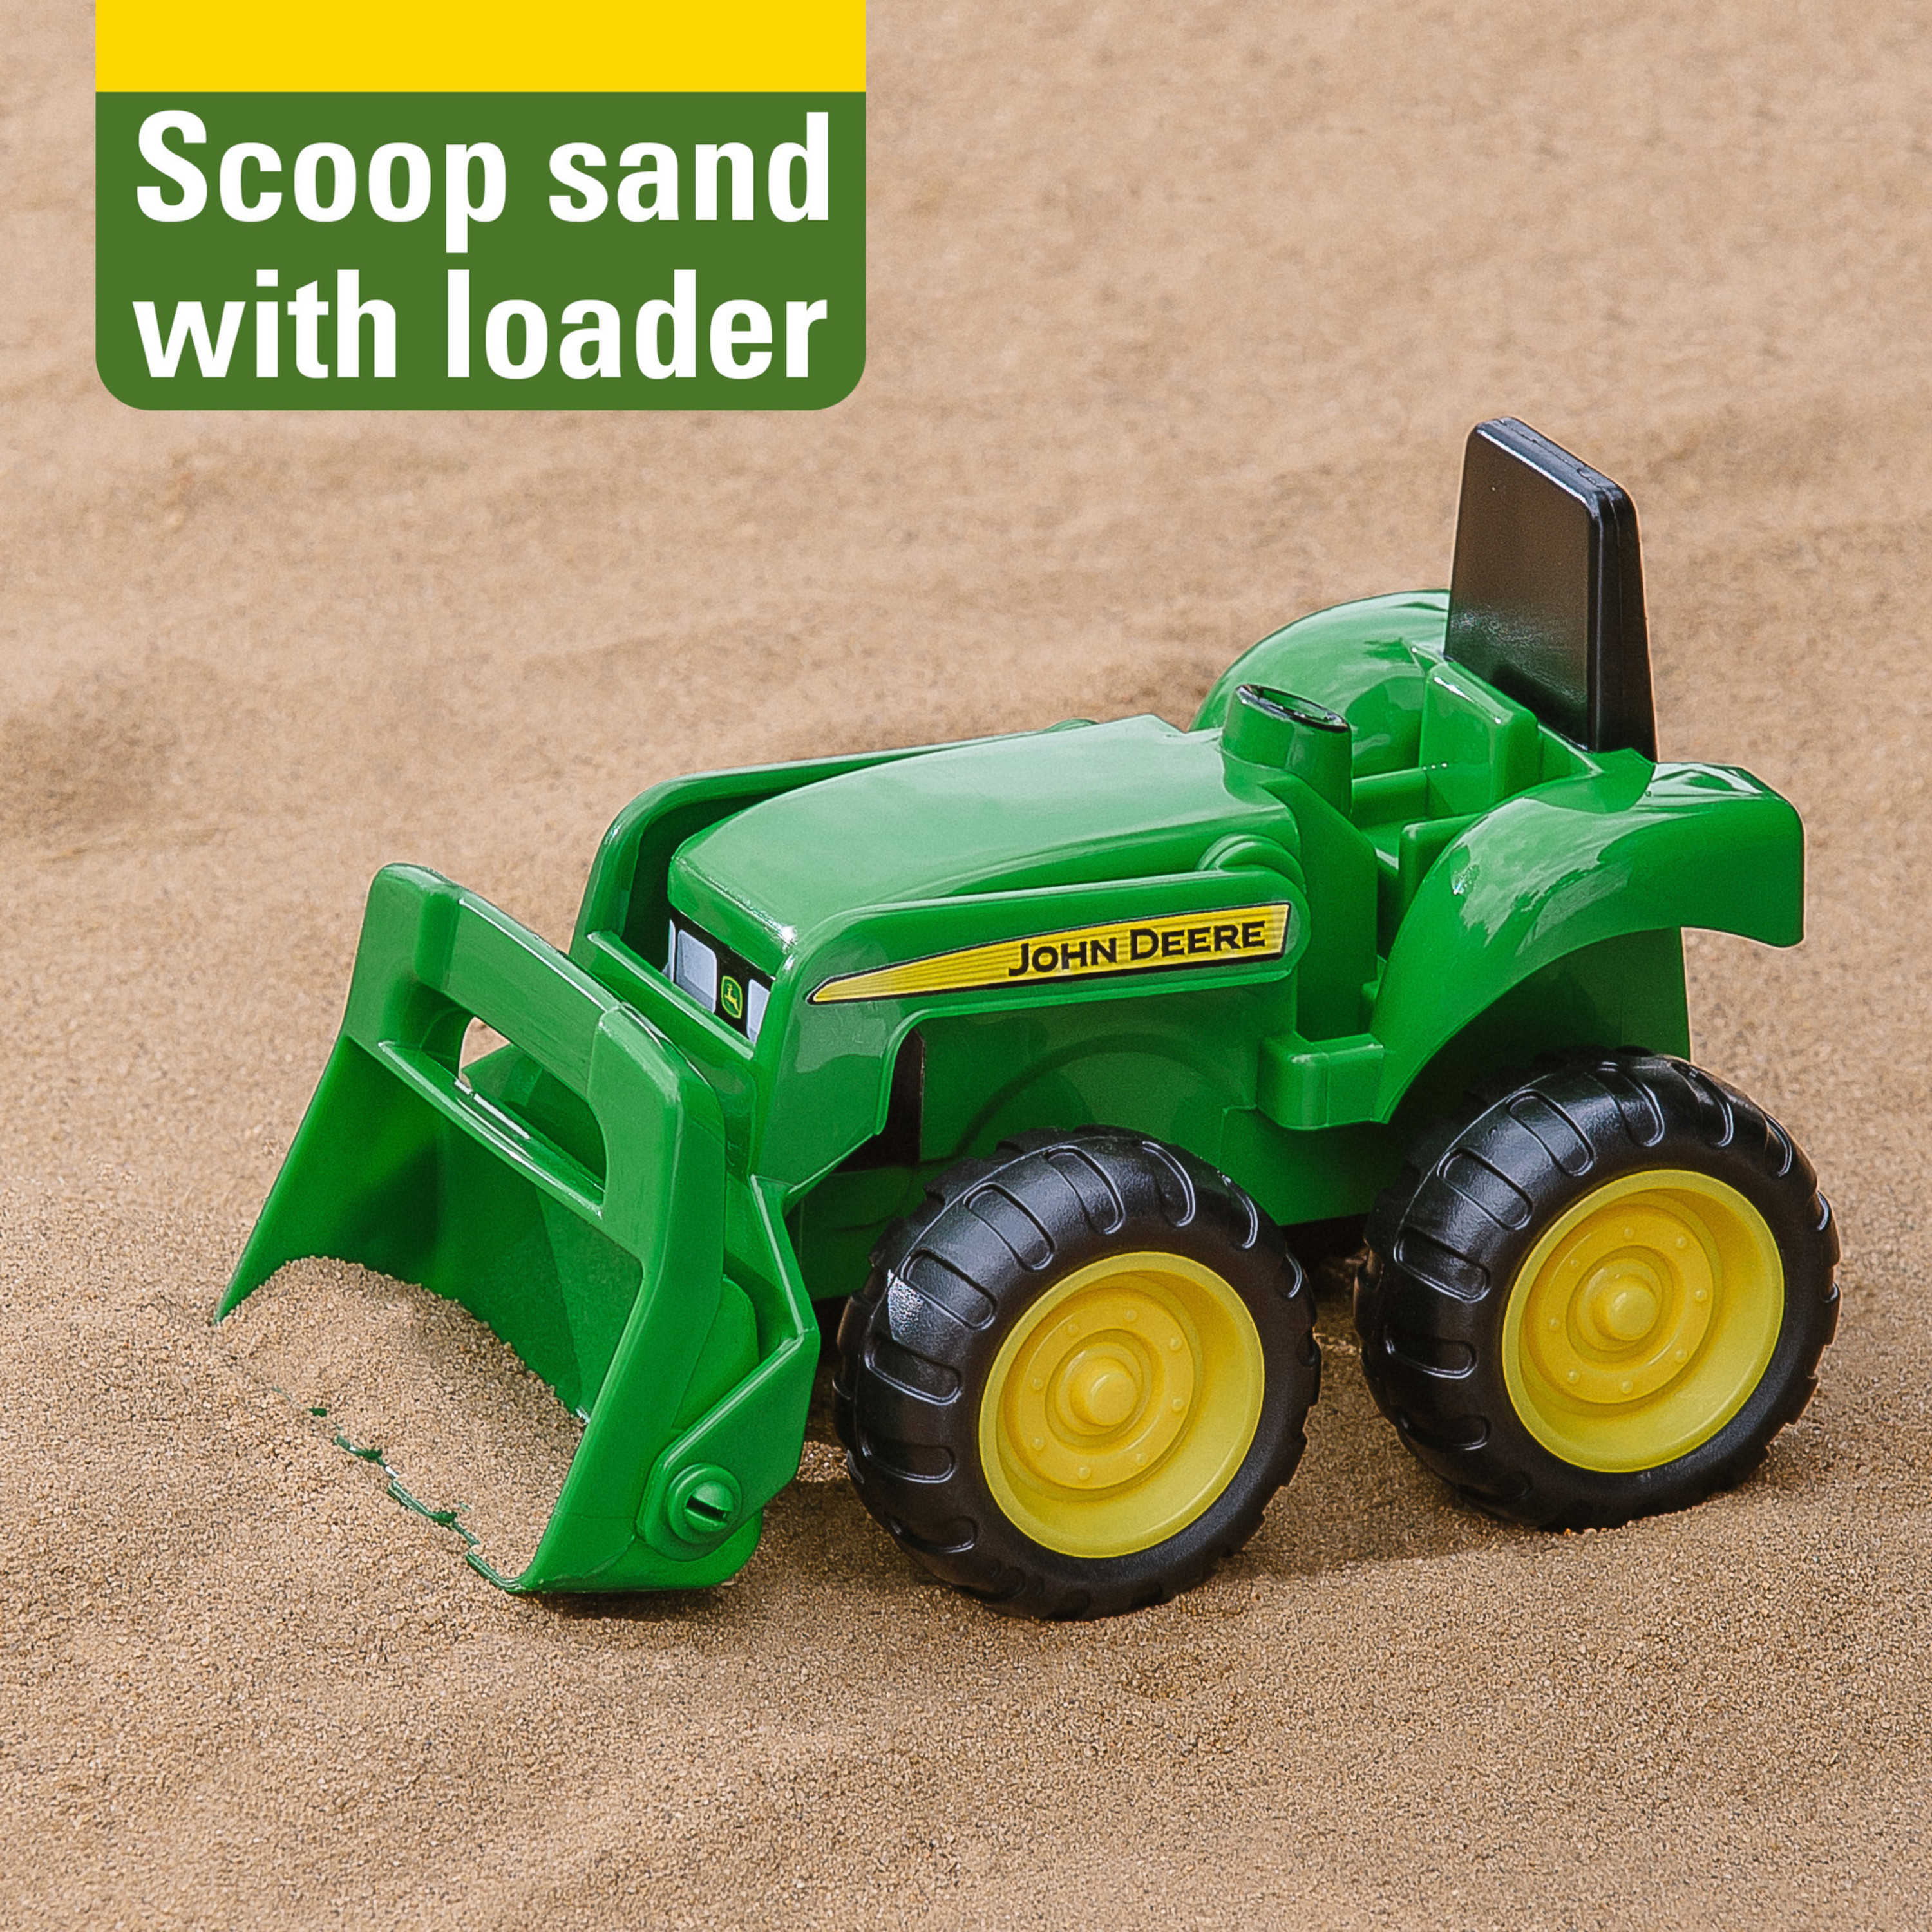 John Deere 6" Sandbox Toy Vehicle Set, Dump Truck and Tractor Toy Vehicles, 2 Pack, Green - image 5 of 13